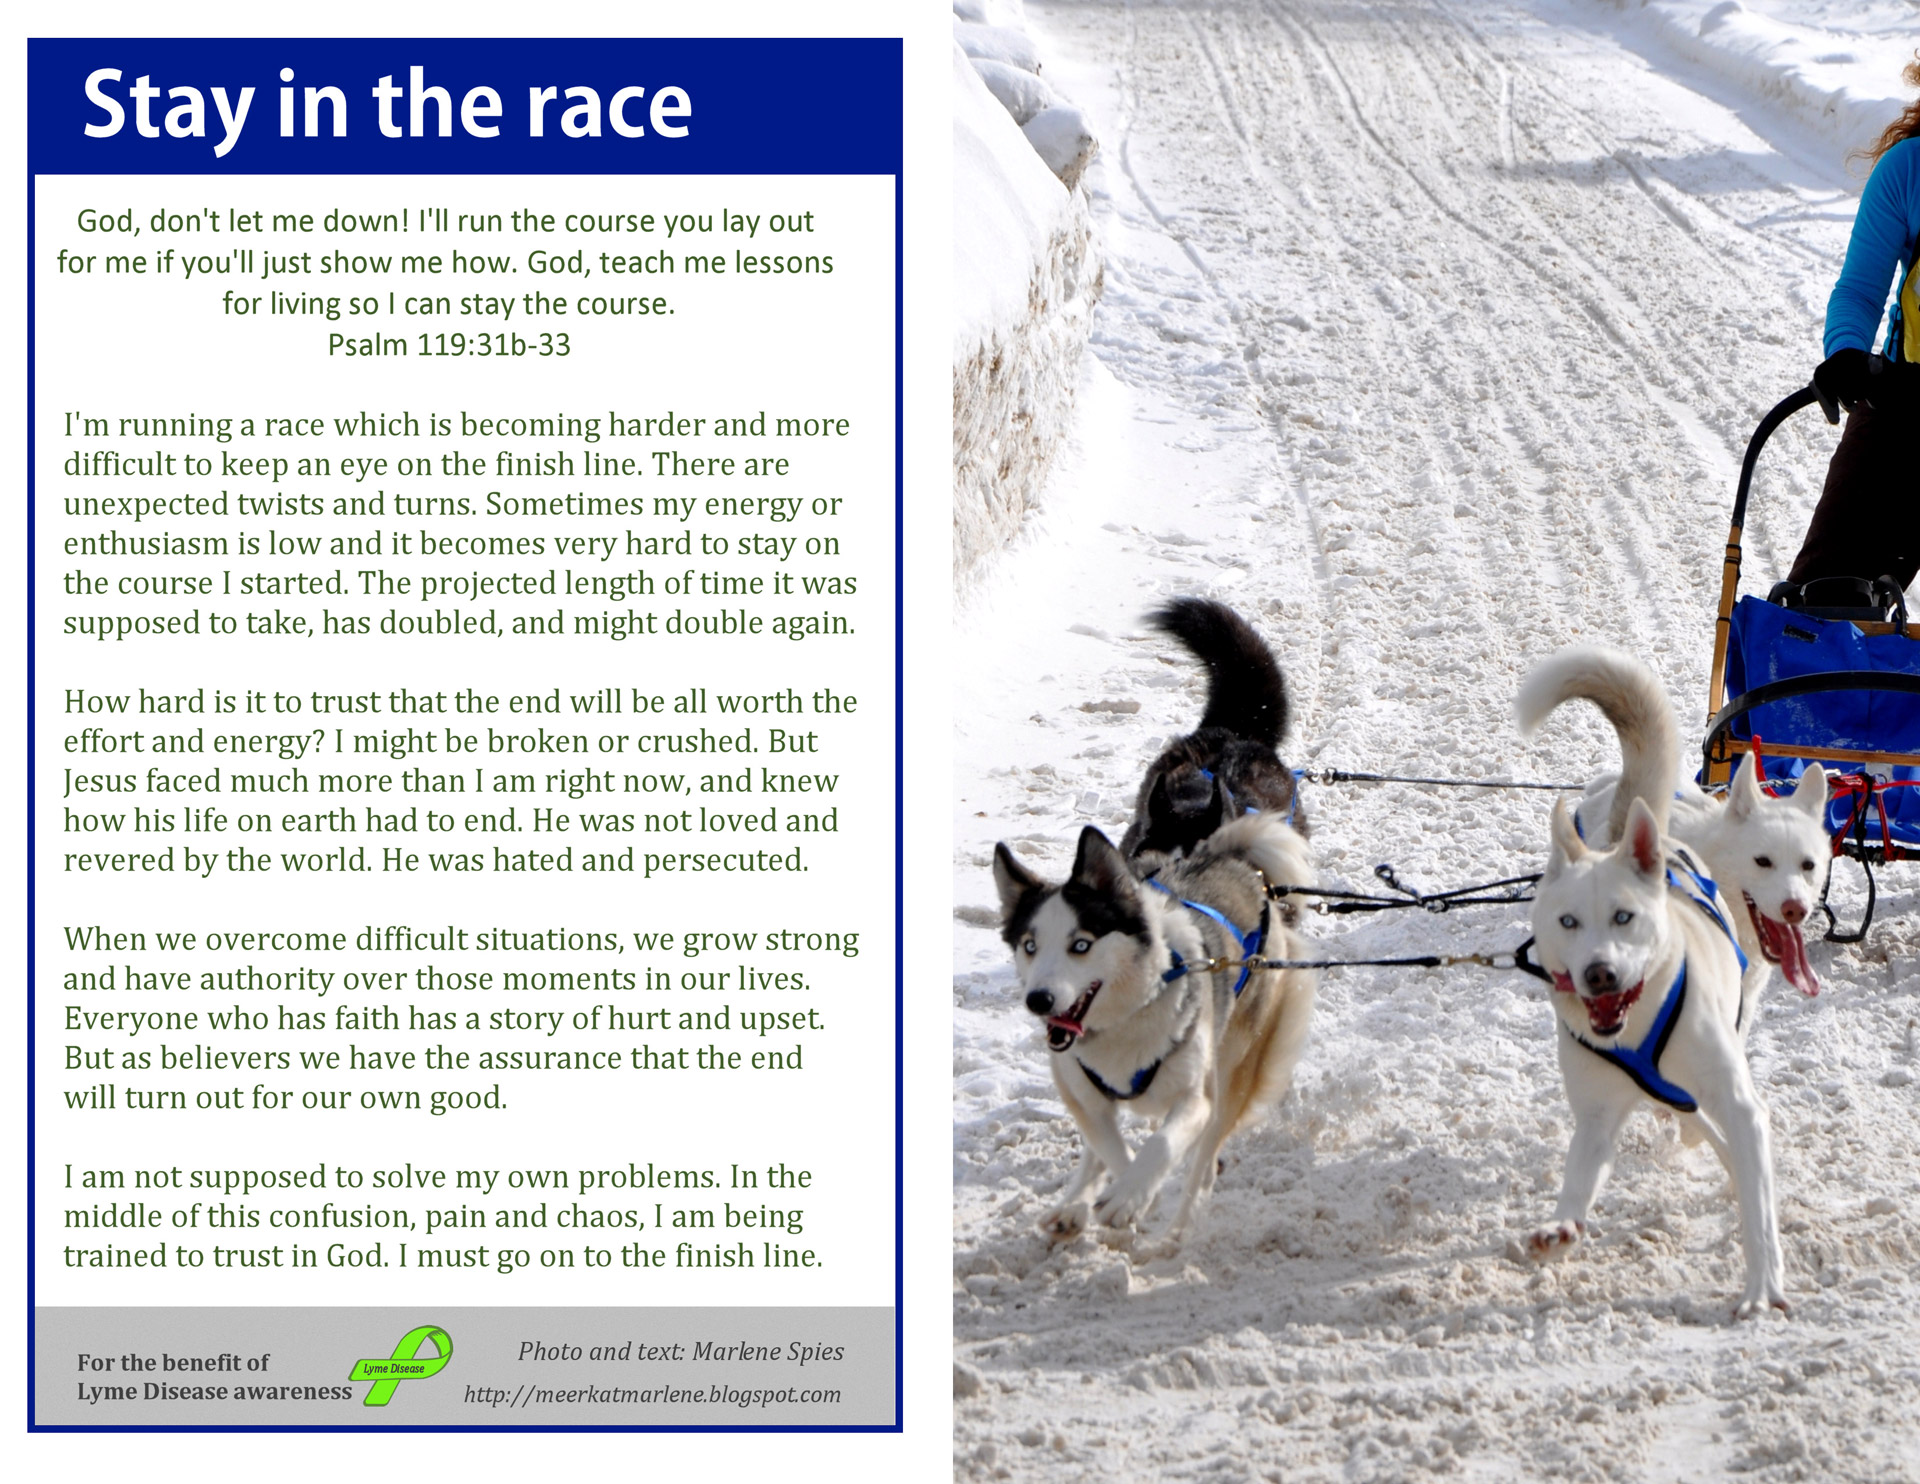 Program or bulletin cover with picture of dog sled racing in the snow. Back panel has Scripture and message.